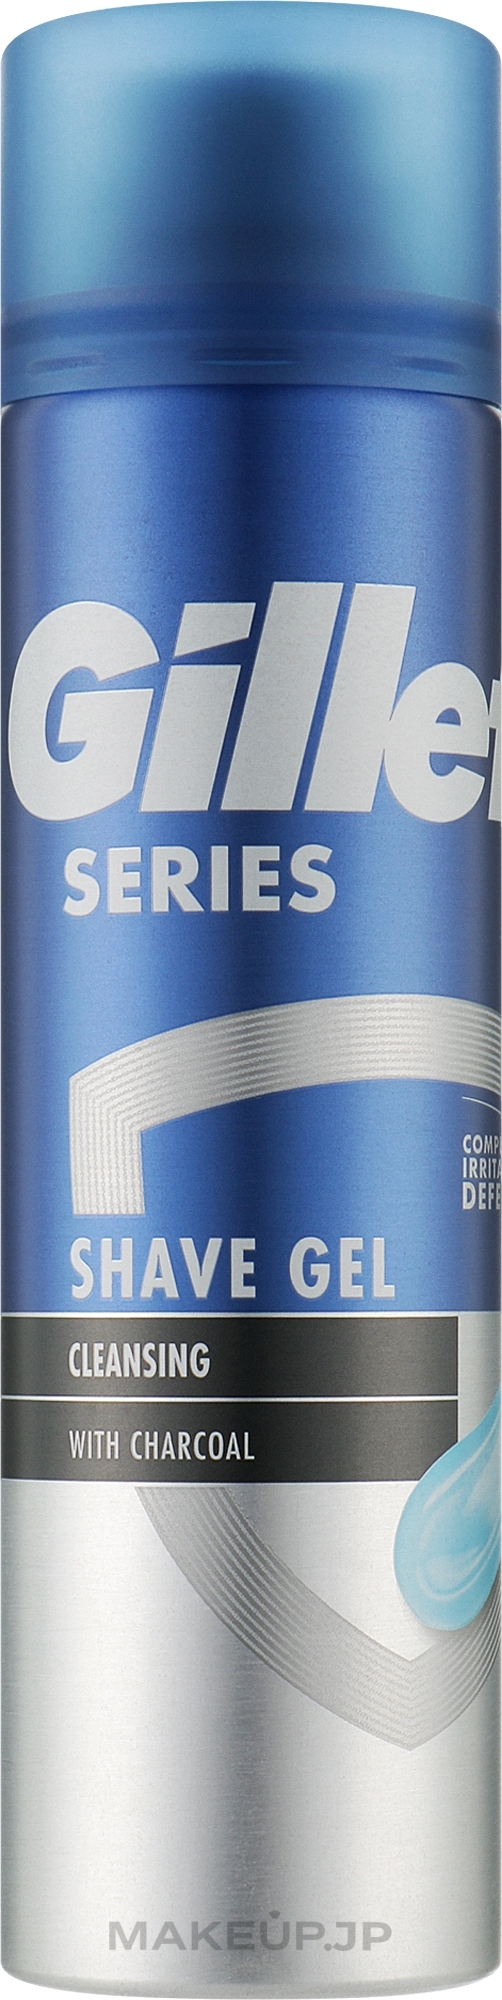 Cleansing Shaving Gel - Gillette Series Charcoal Cleansing Shave Gel — photo 200 ml